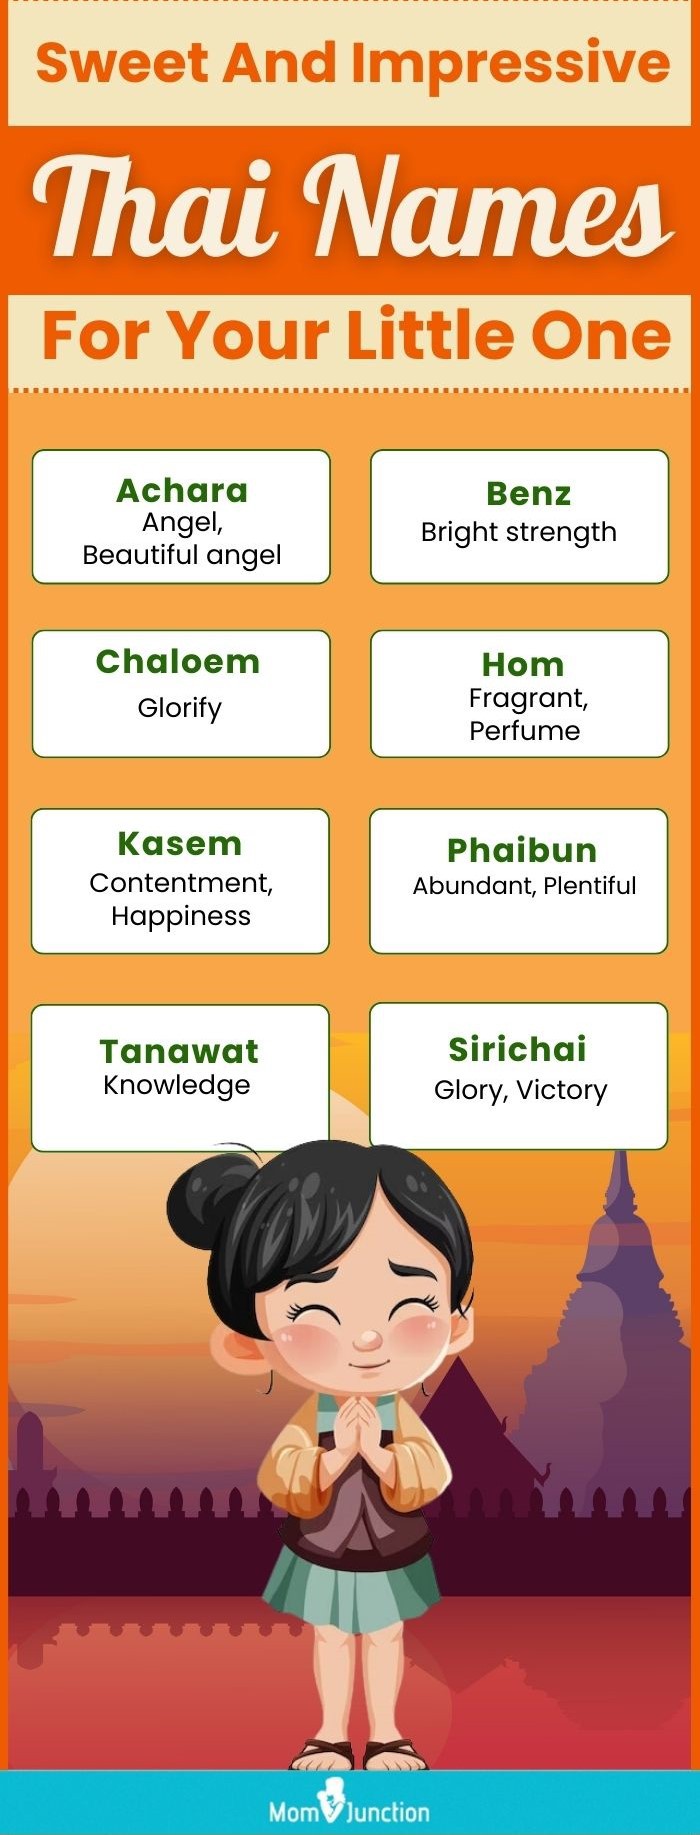 Sweet And Impressive Thai Names For Your Little One (infographic)